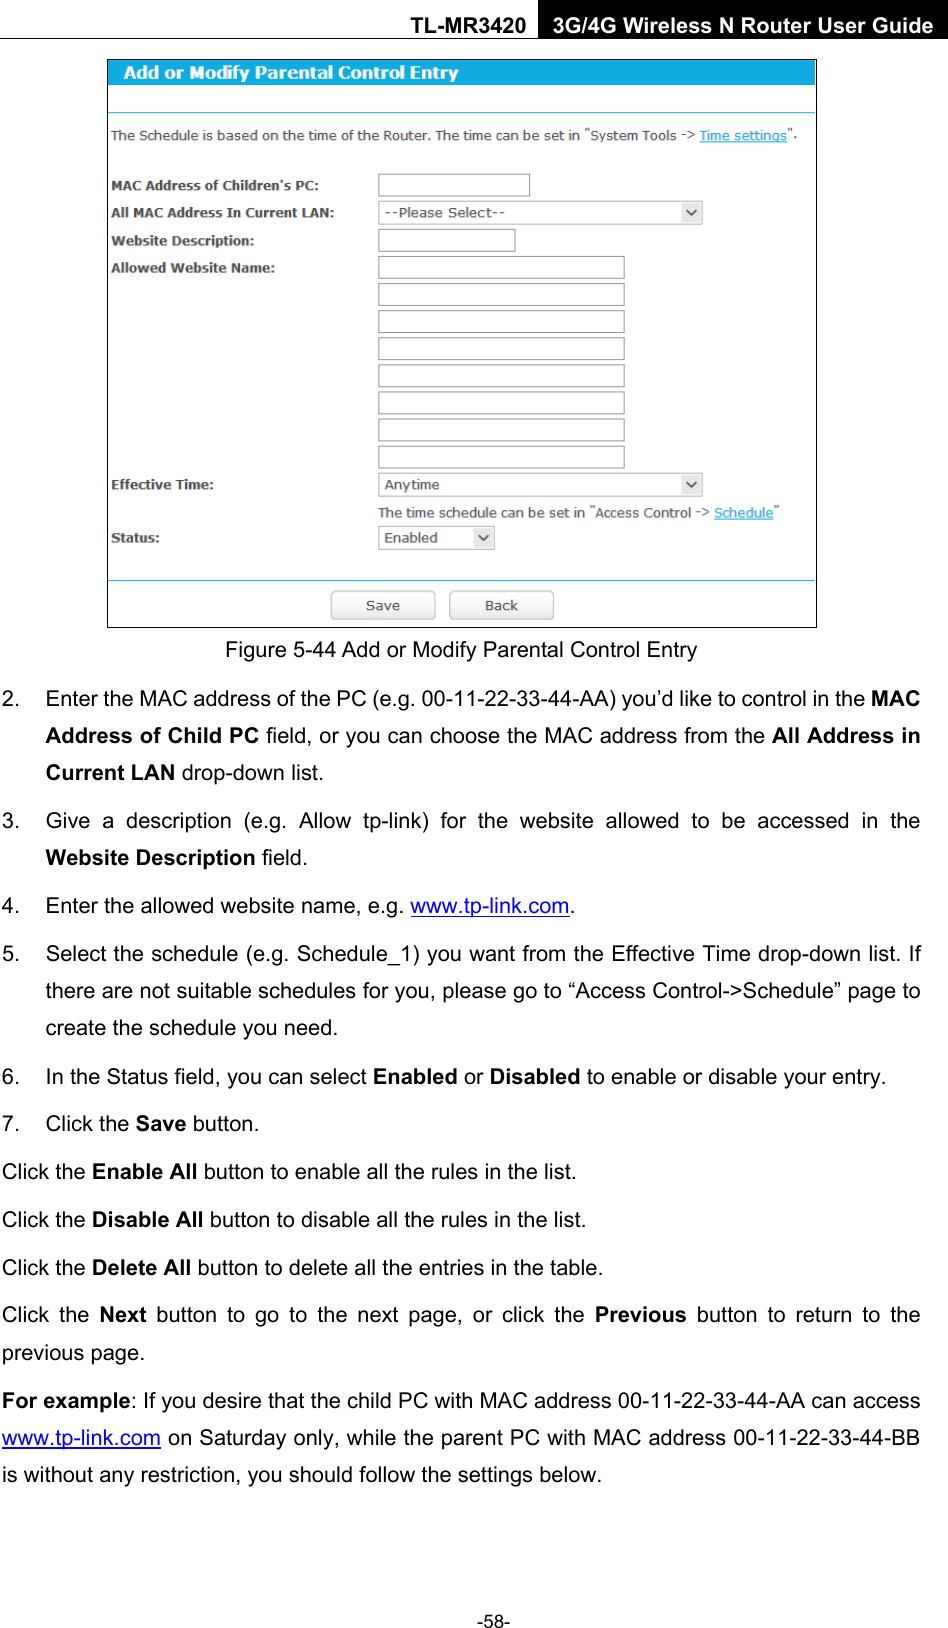    -58- TL-MR3420 3G/4G Wireless N Router User Guide  Figure 5-44 Add or Modify Parental Control Entry 2. Enter the MAC address of the PC (e.g. 00-11-22-33-44-AA) you’d like to control in the MAC Address of Child PC field, or you can choose the MAC address from the All Address in Current LAN drop-down list. 3. Give a description (e.g. Allow tp-link) for the website allowed to be accessed in the Website Description field. 4. Enter the allowed website name, e.g. www.tp-link.com. 5. Select the schedule (e.g. Schedule_1) you want from the Effective Time drop-down list. If there are not suitable schedules for you, please go to “Access Control-&gt;Schedule” page to create the schedule you need. 6. In the Status field, you can select Enabled or Disabled to enable or disable your entry. 7. Click the Save button. Click the Enable All button to enable all the rules in the list. Click the Disable All button to disable all the rules in the list. Click the Delete All button to delete all the entries in the table. Click the Next button to go to the next page, or click the Previous button to return to the previous page. For example: If you desire that the child PC with MAC address 00-11-22-33-44-AA can access   www.tp-link.com on Saturday only, while the parent PC with MAC address 00-11-22-33-44-BB is without any restriction, you should follow the settings below. 